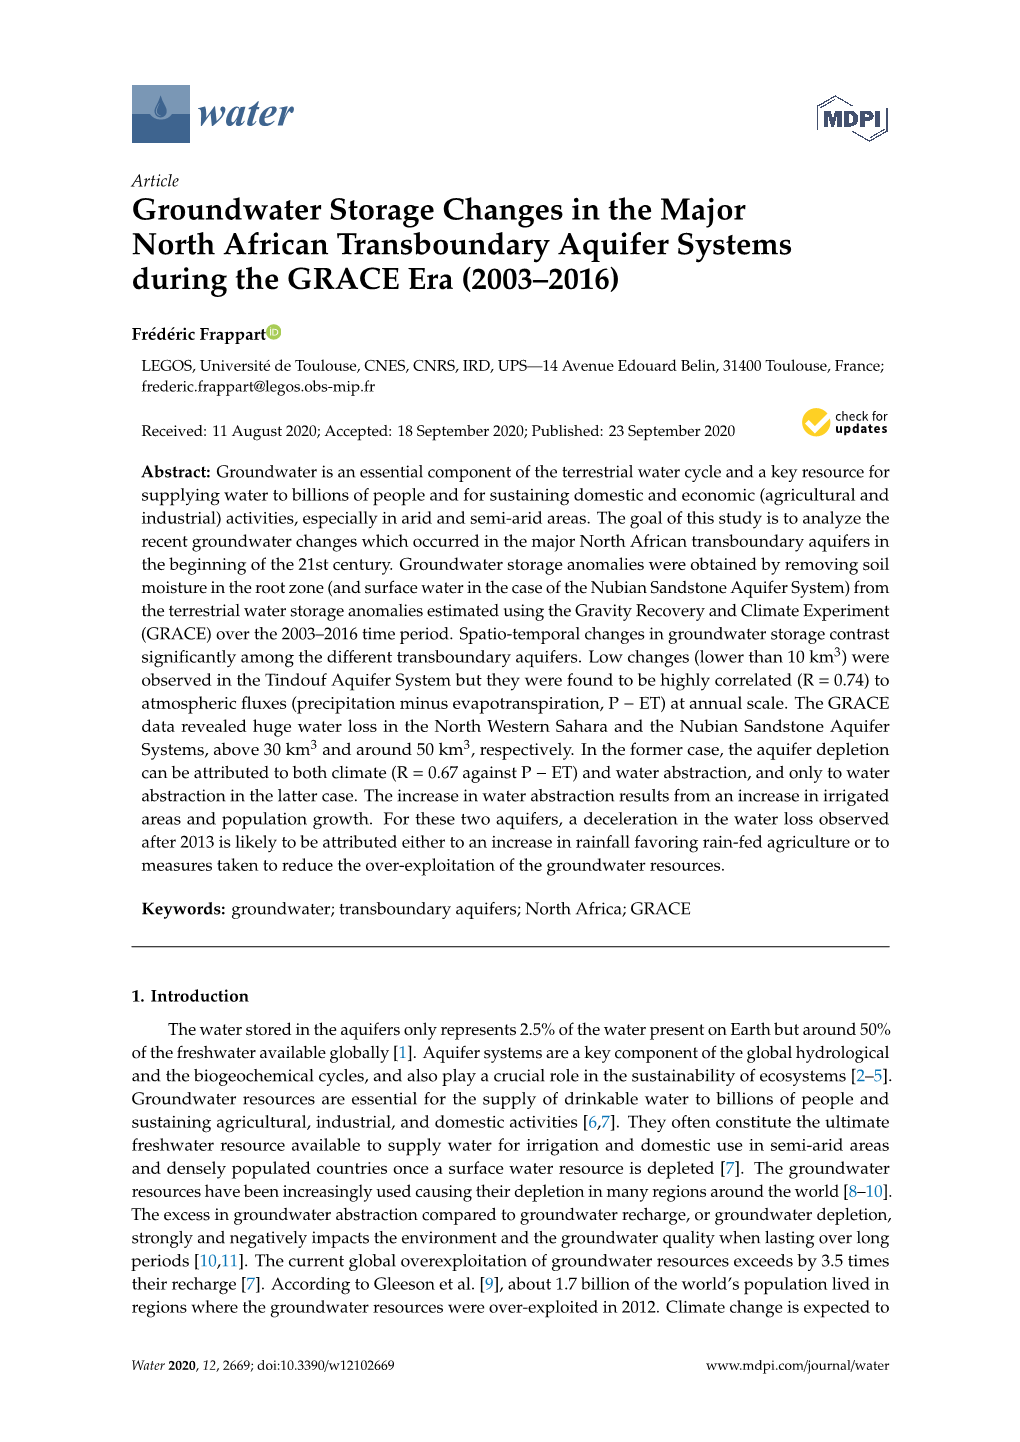 Groundwater Storage Changes in the Major North African Transboundary Aquifer Systems During the GRACE Era (2003–2016)